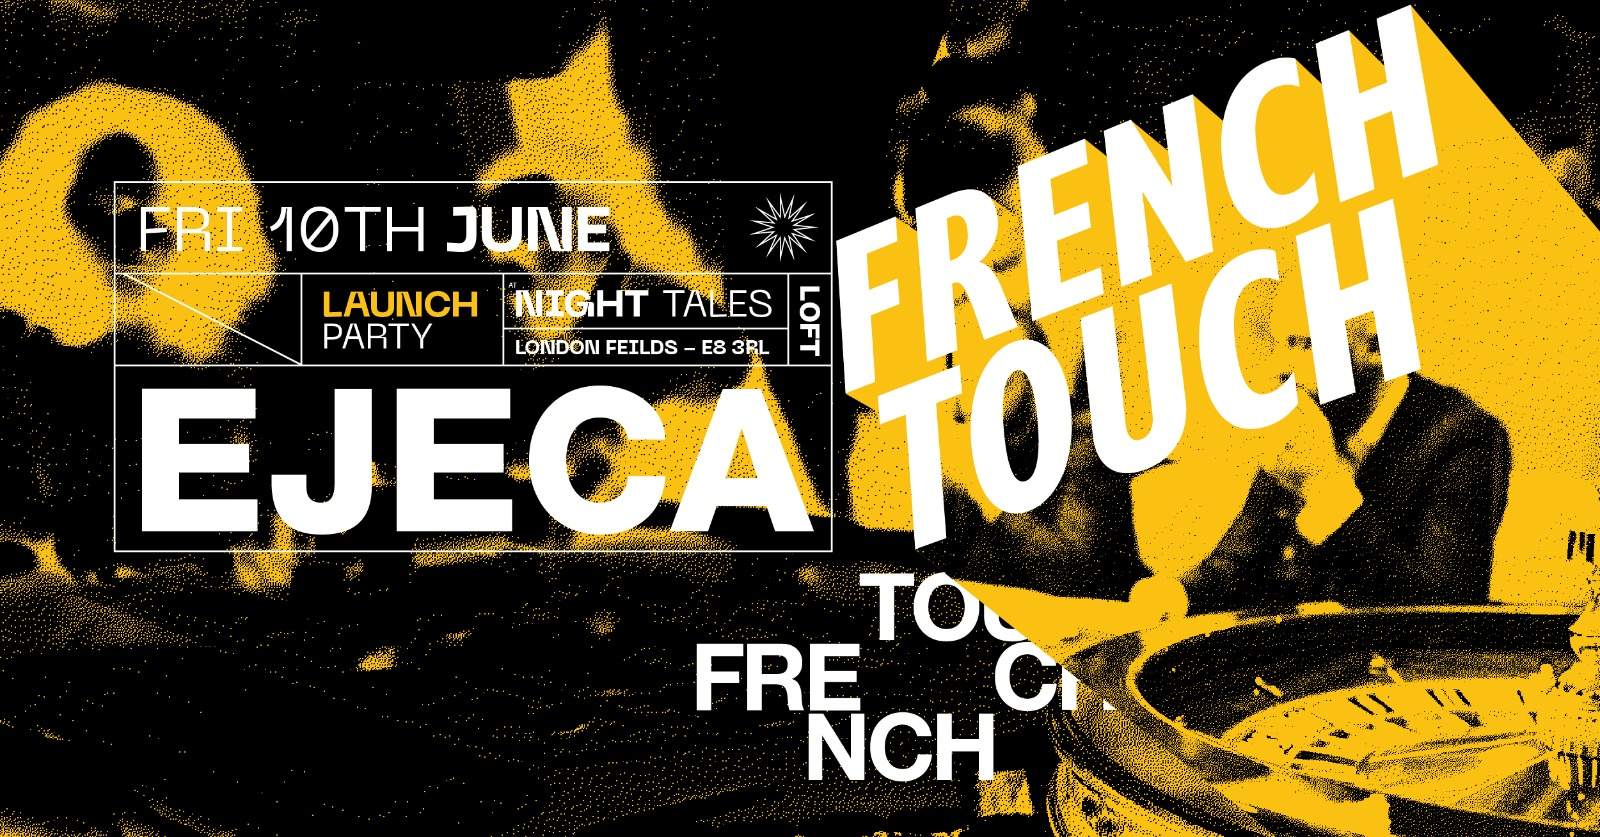 NT's Loft: Ejeca [French Touch Launch Party] - Página frontal